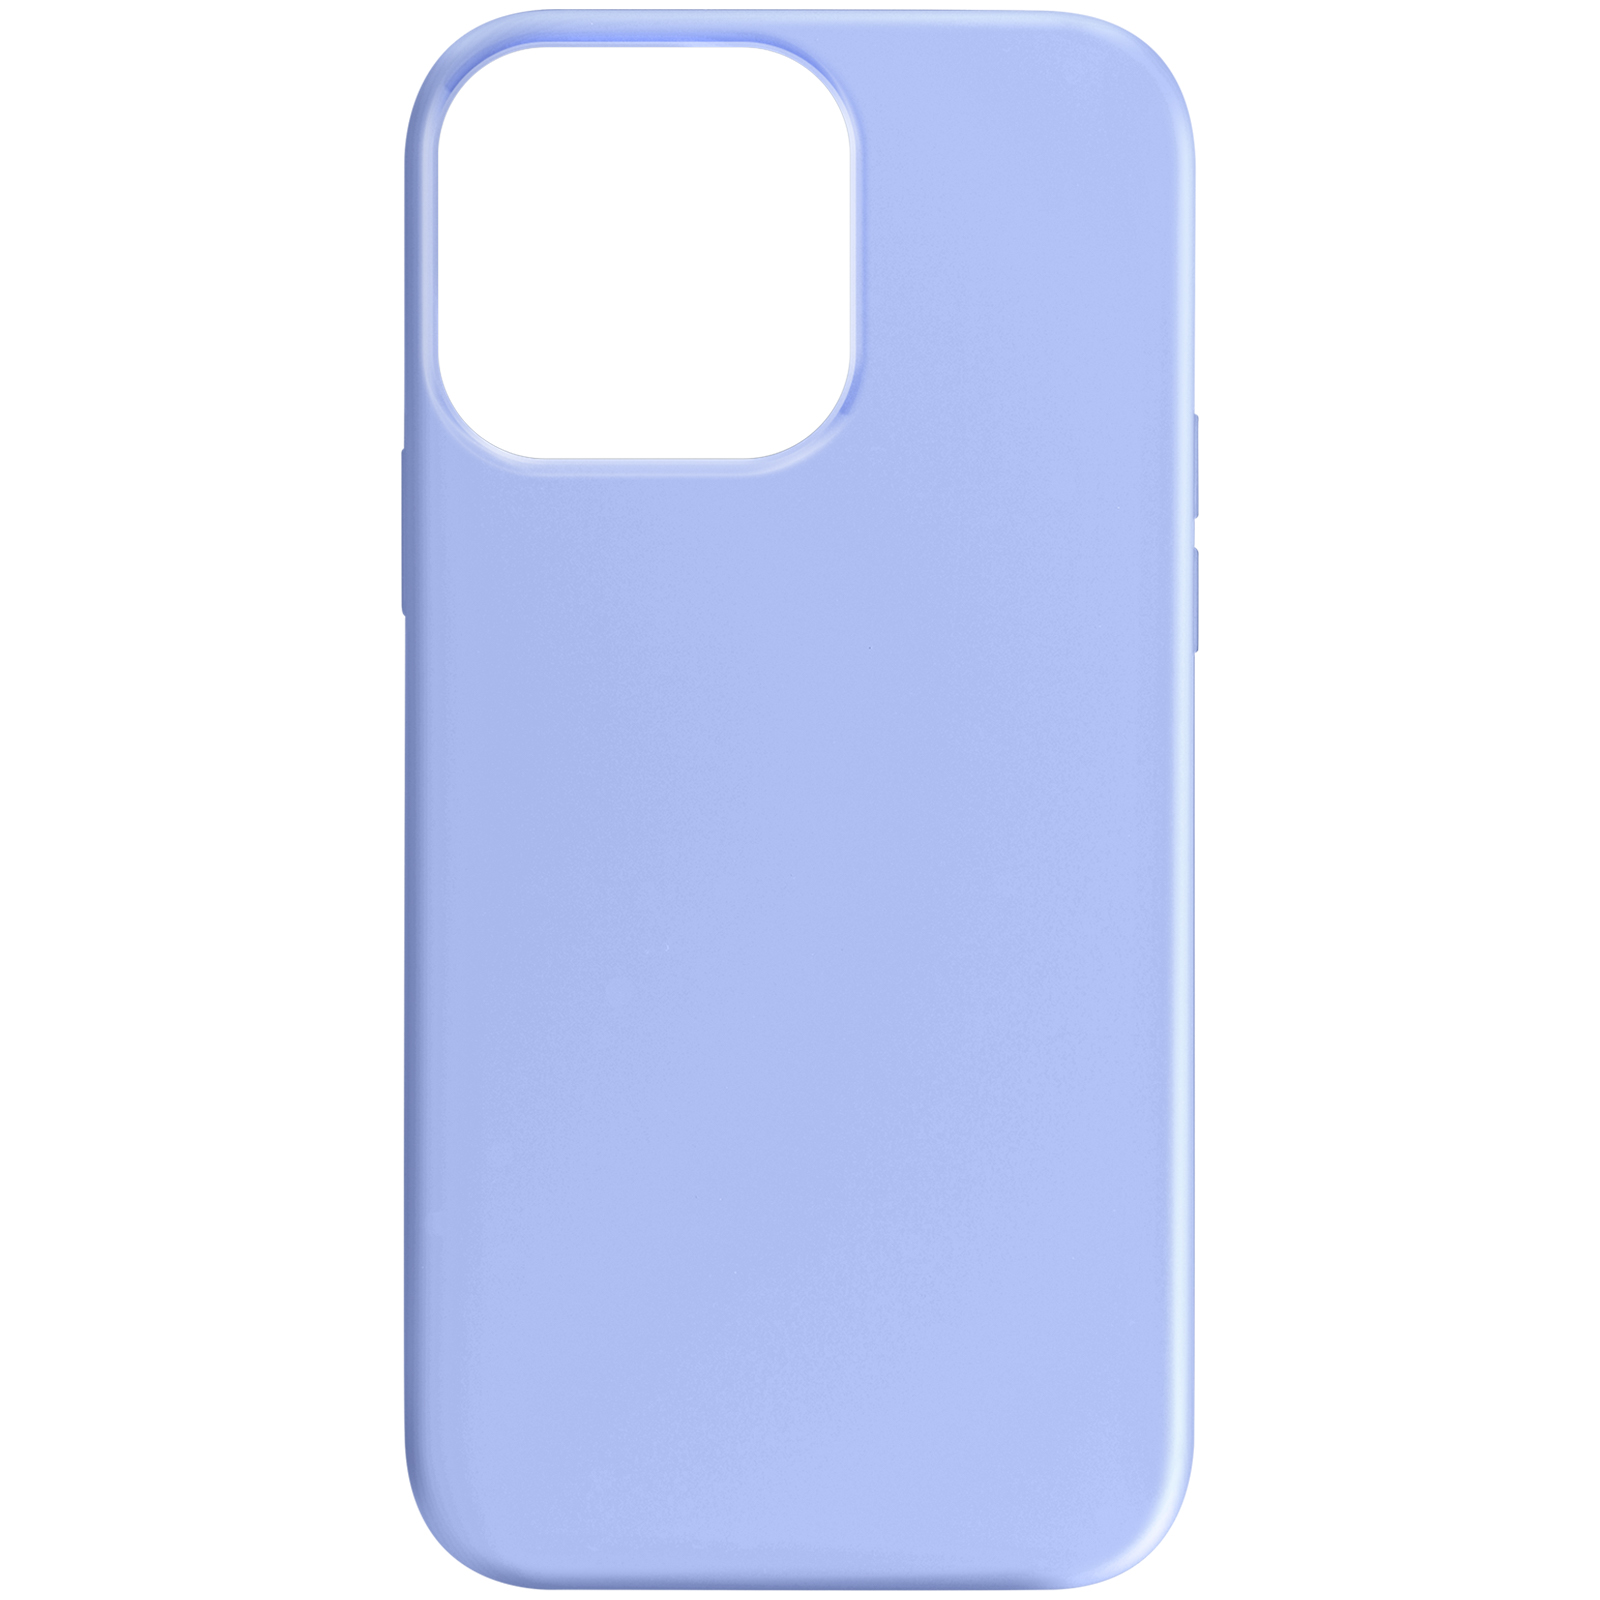 Backcover, Pro Touch Max, AVIZAR 15 iPhone Series, Soft Apple, Lila